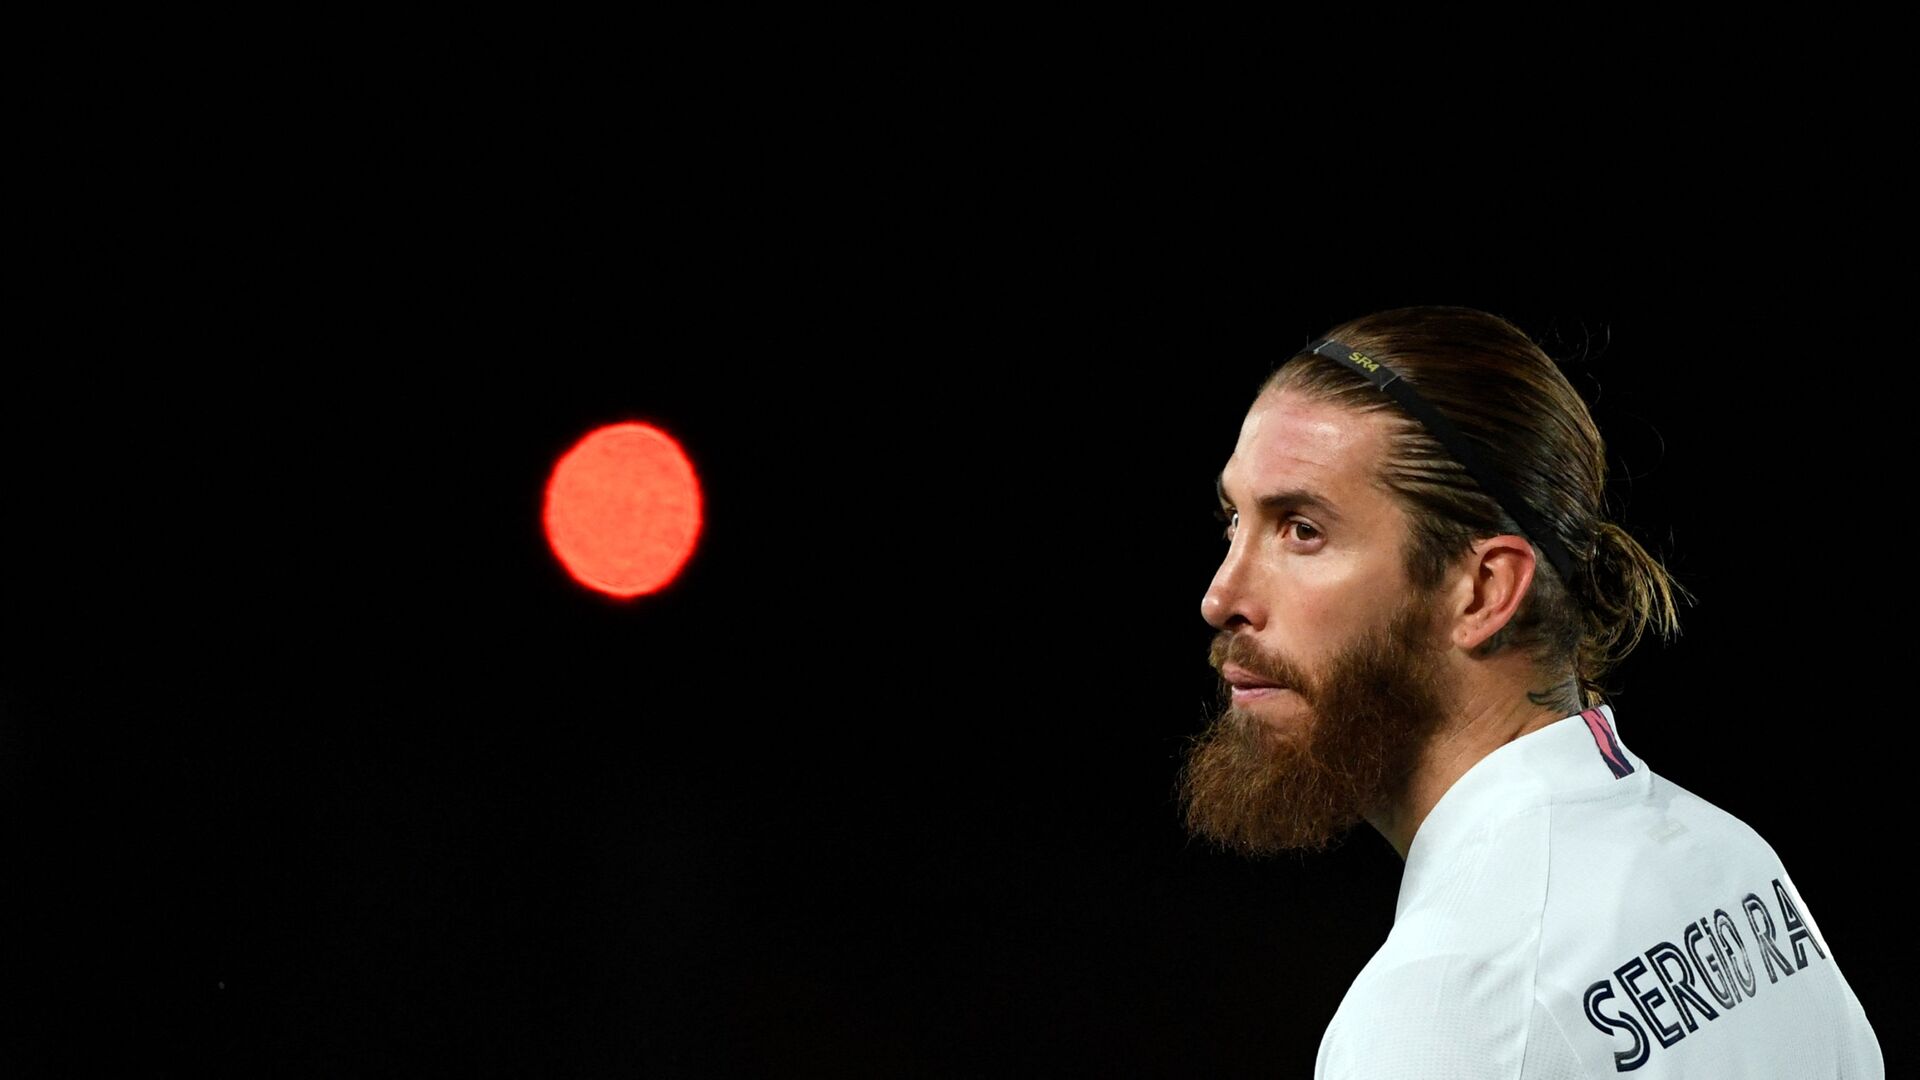 Sergio Ramos    Real Madrid's Spanish defender Sergio Ramos looks on during the UEFA Champions League round of 16 second leg football match between Real Madrid CF and Atalanta at the Alfredo di Stefano stadium in Valdebebas, on the outskirts of Madrid on March 15, 2021 - اسپوتنیک افغانستان  , 1920, 23.12.2021